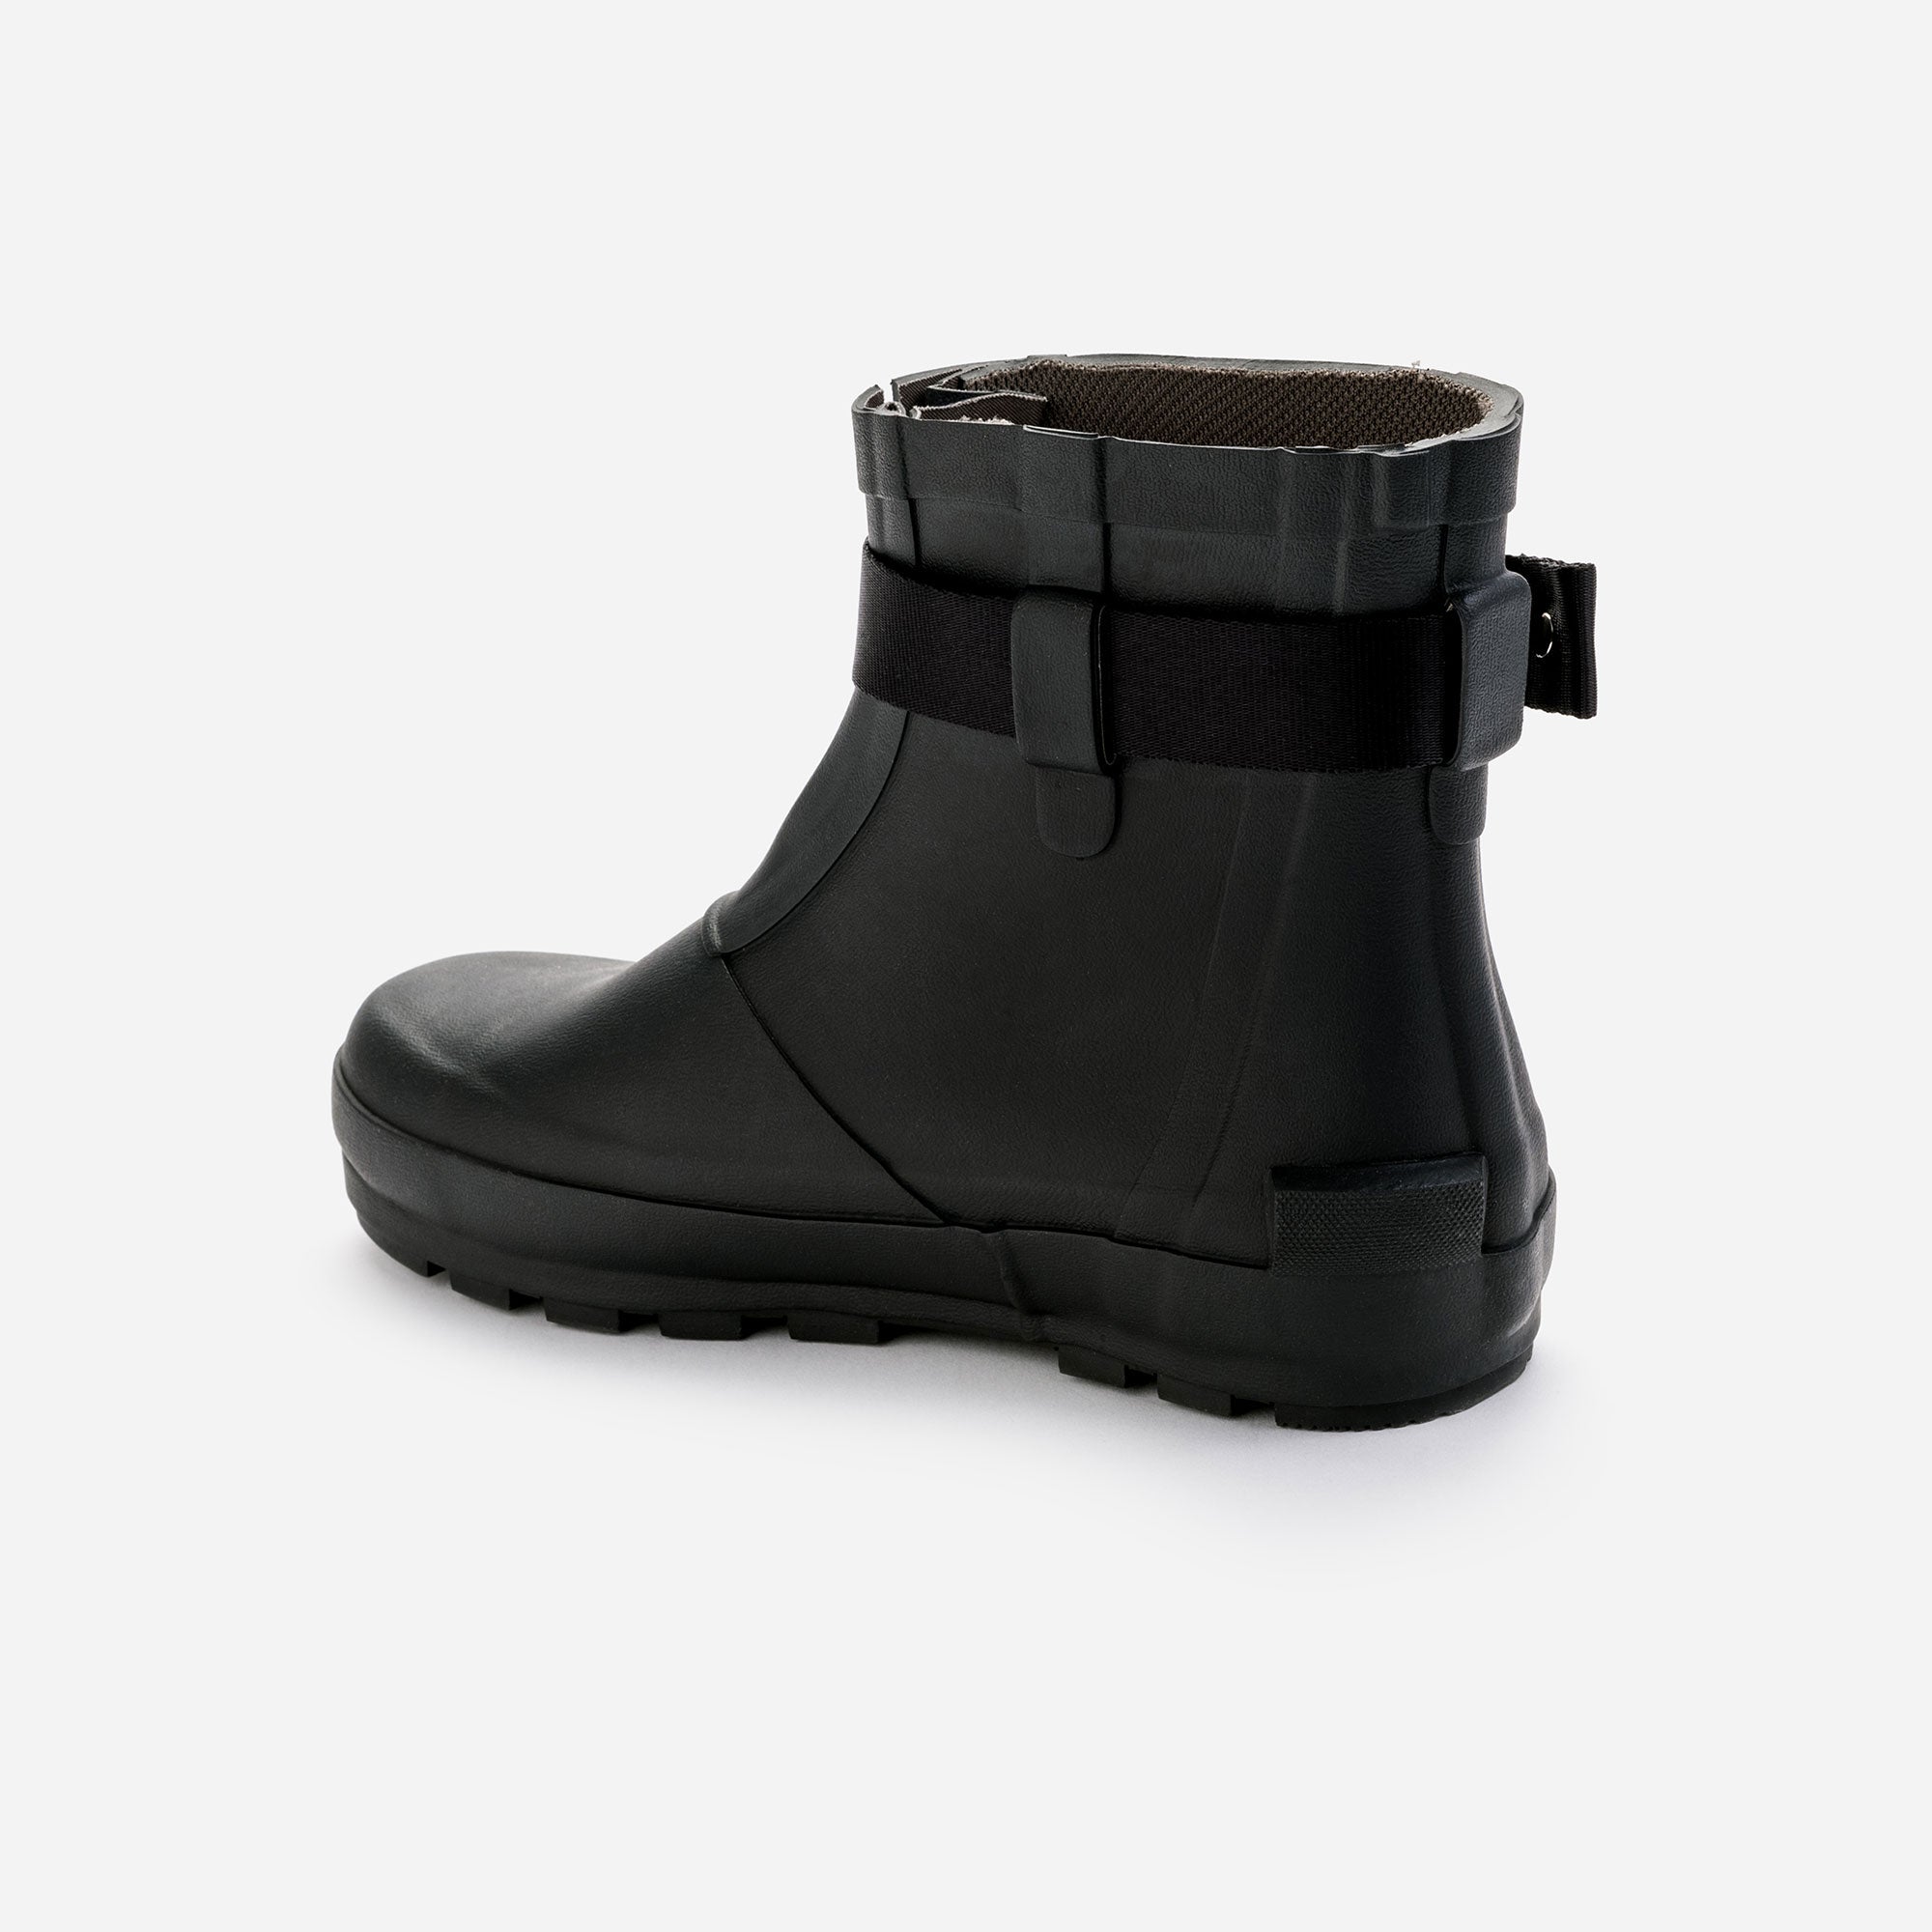 810s Marke Boots CHARCOAL